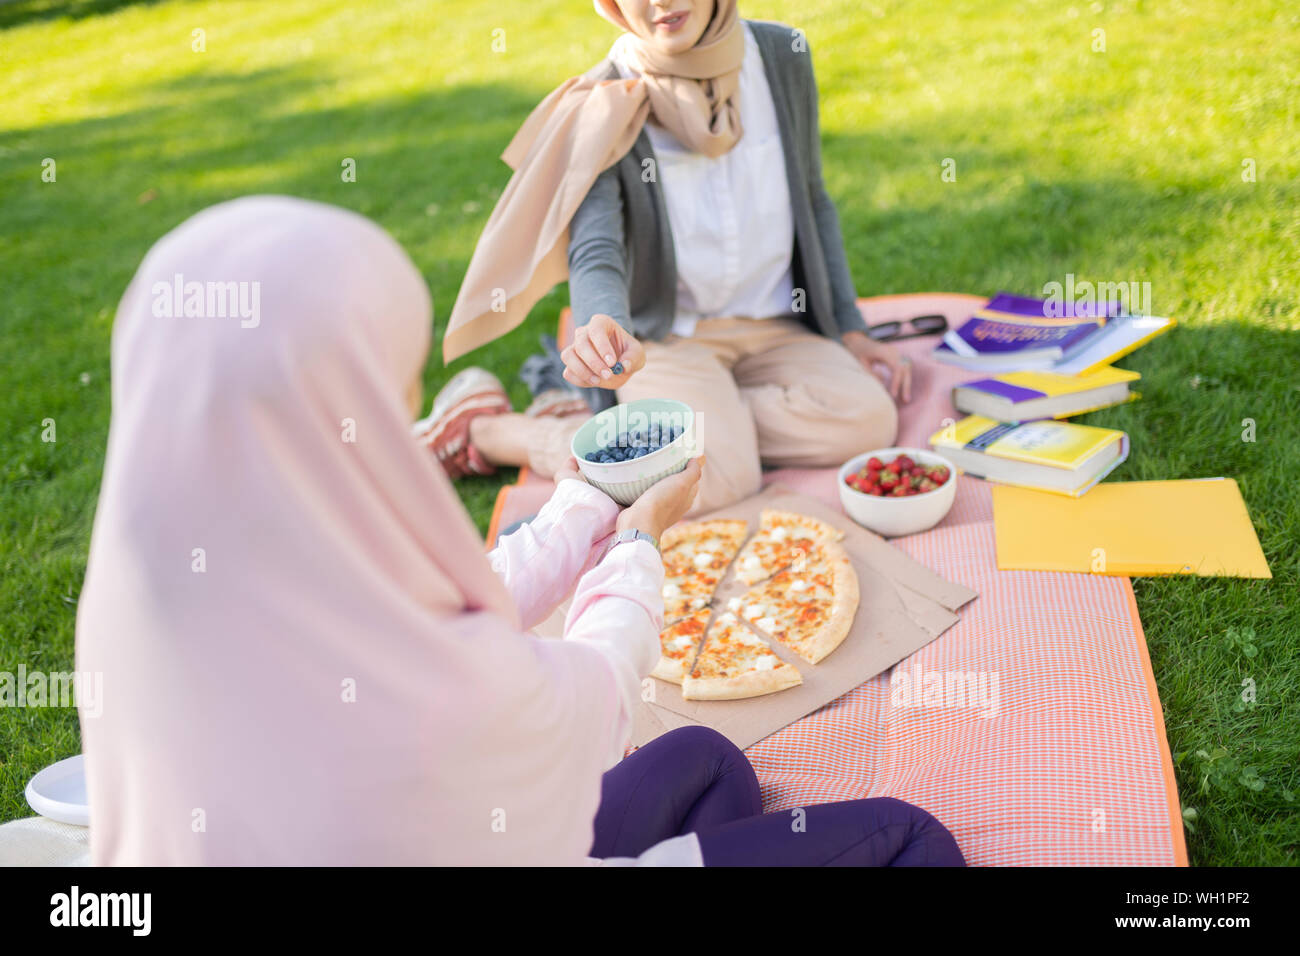 Women in hijab taking blueberries after studying with friend Stock Photo